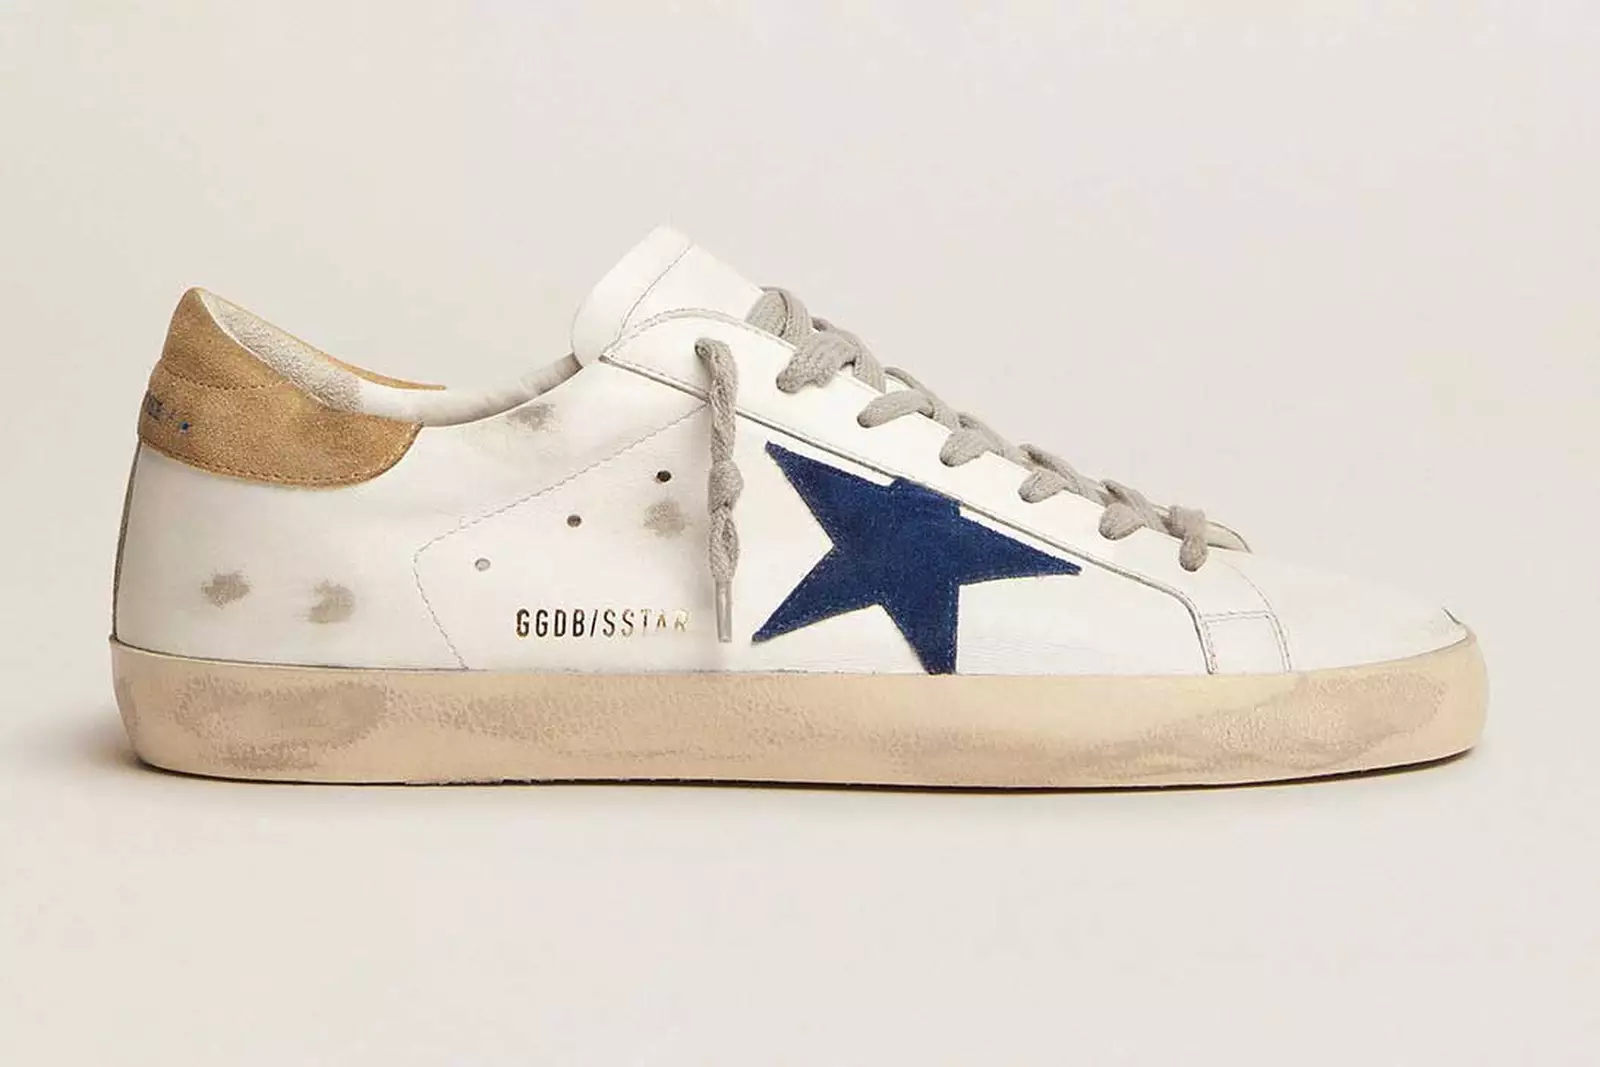 Why Are Golden Goose Shoes so Expensive?